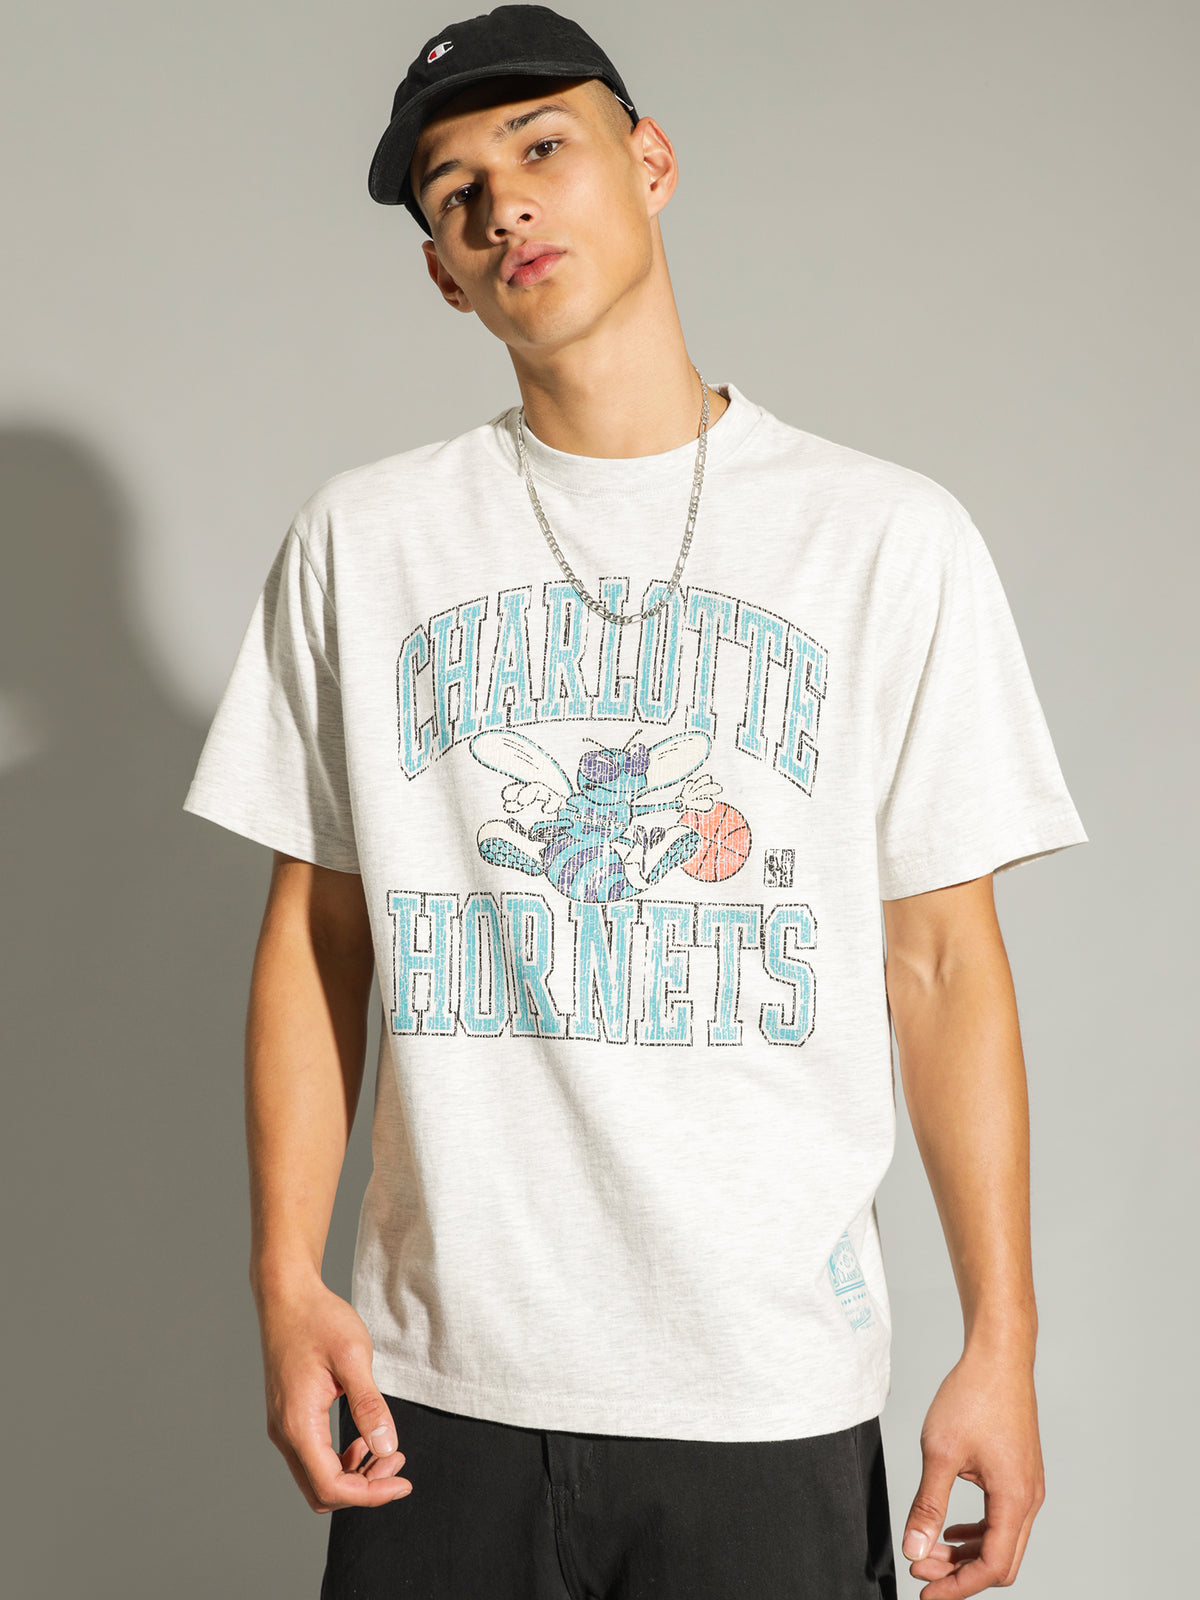 Charlotte Hornets T-Shirt in Snow Marle